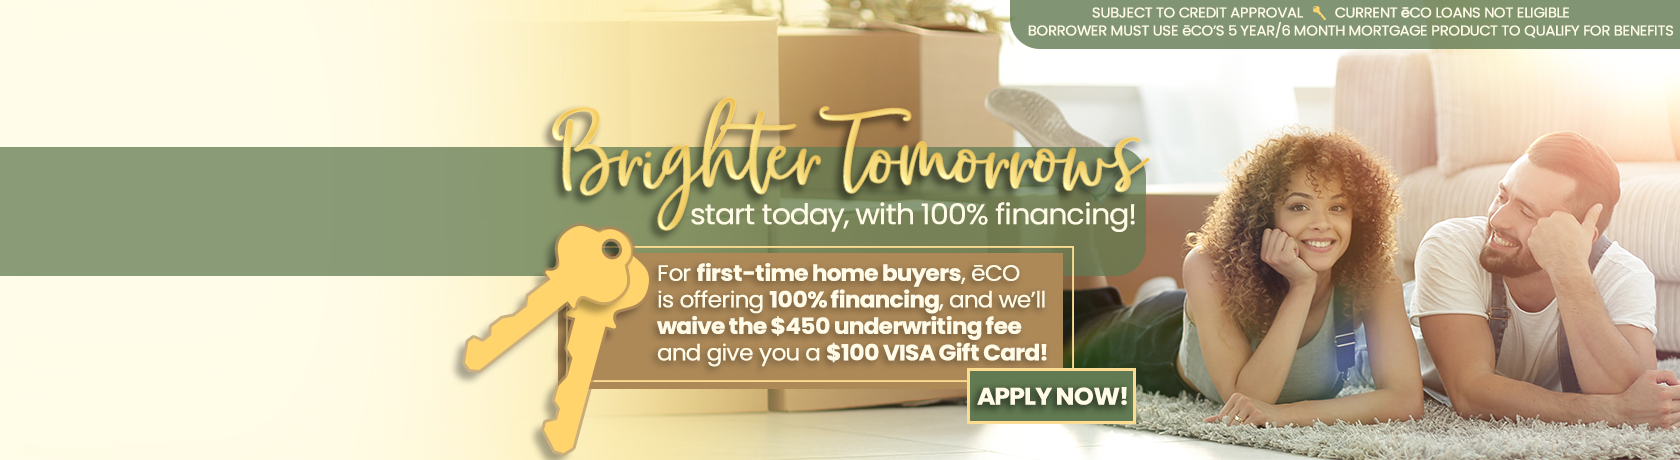 Brighter Tomorrows start today, with 100% financing. For First-time home buyers, eCO is offering 100% financing, and we'll waive the $450 underwriting fee and give you a $100 VISA Gift Card. Apply Now.
Subject to credit approval. Current eCO Loans not eligible. Borrower must use eCO's 5 year/6month mortgage product to qualify for benefits.